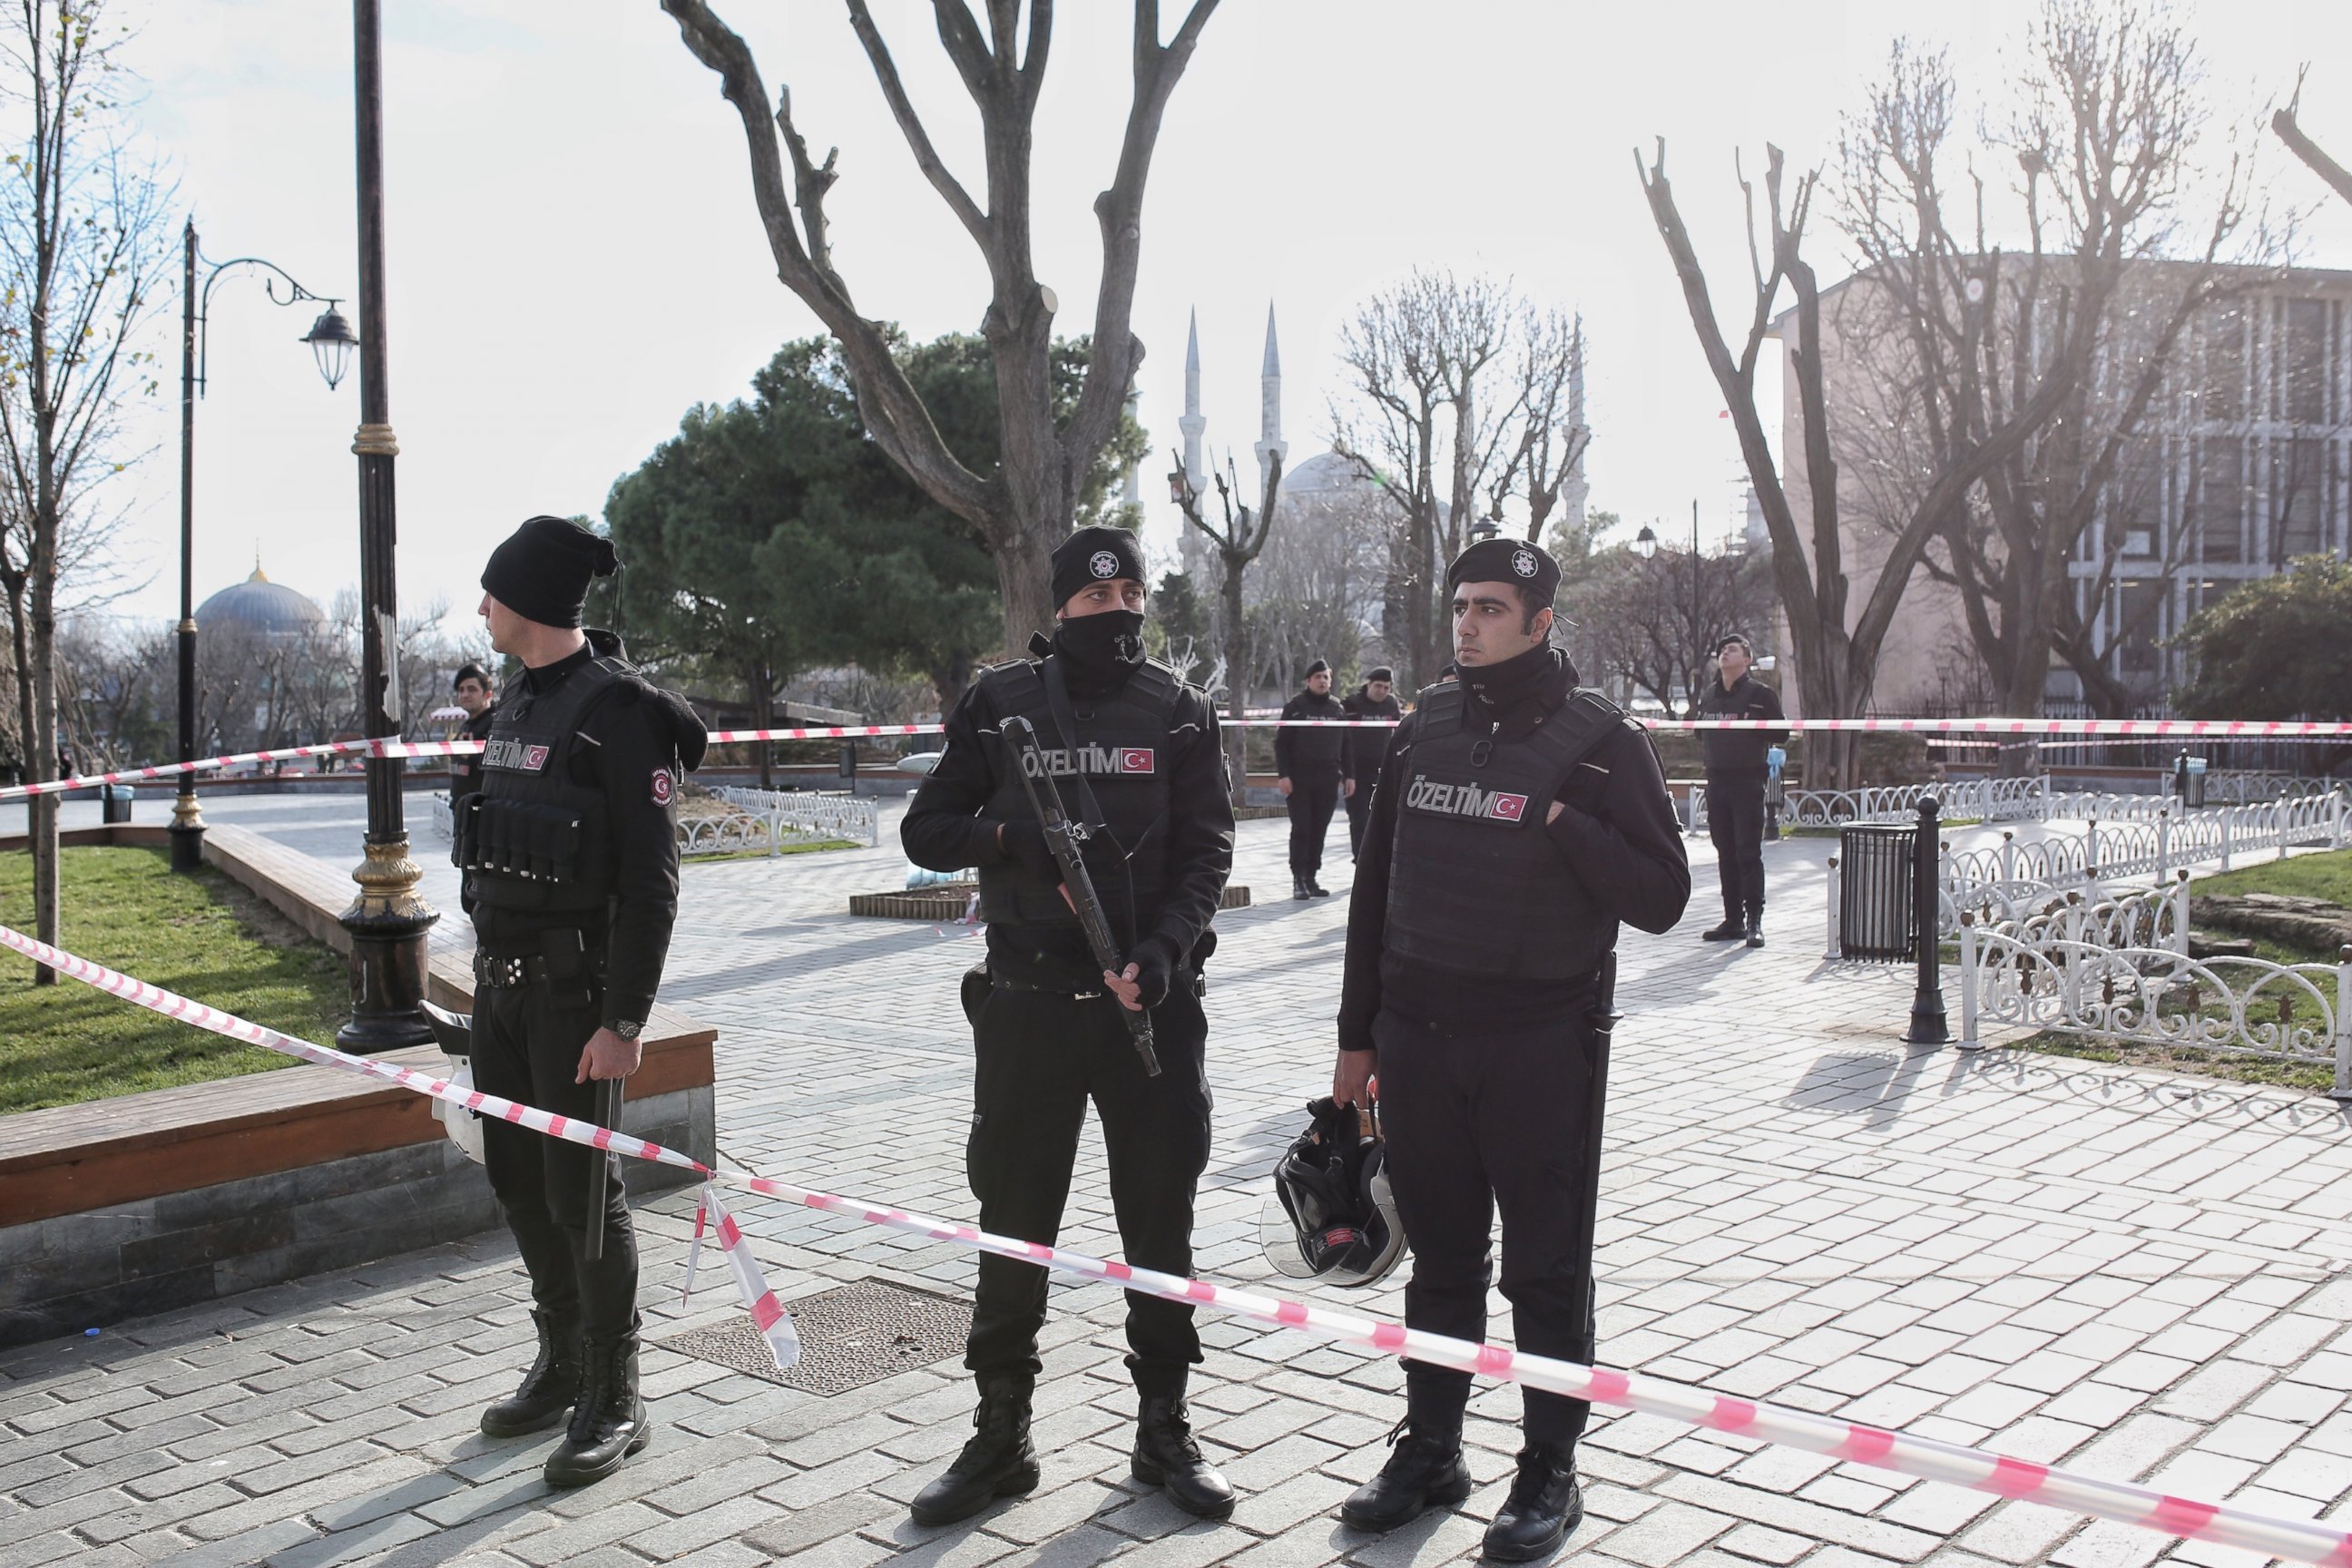 PHOTO: Turkish police secure the area after an explosion in the central Istanbul Sultanahmet district on Jan. 12, 2016 in Istanbul, Turkey.